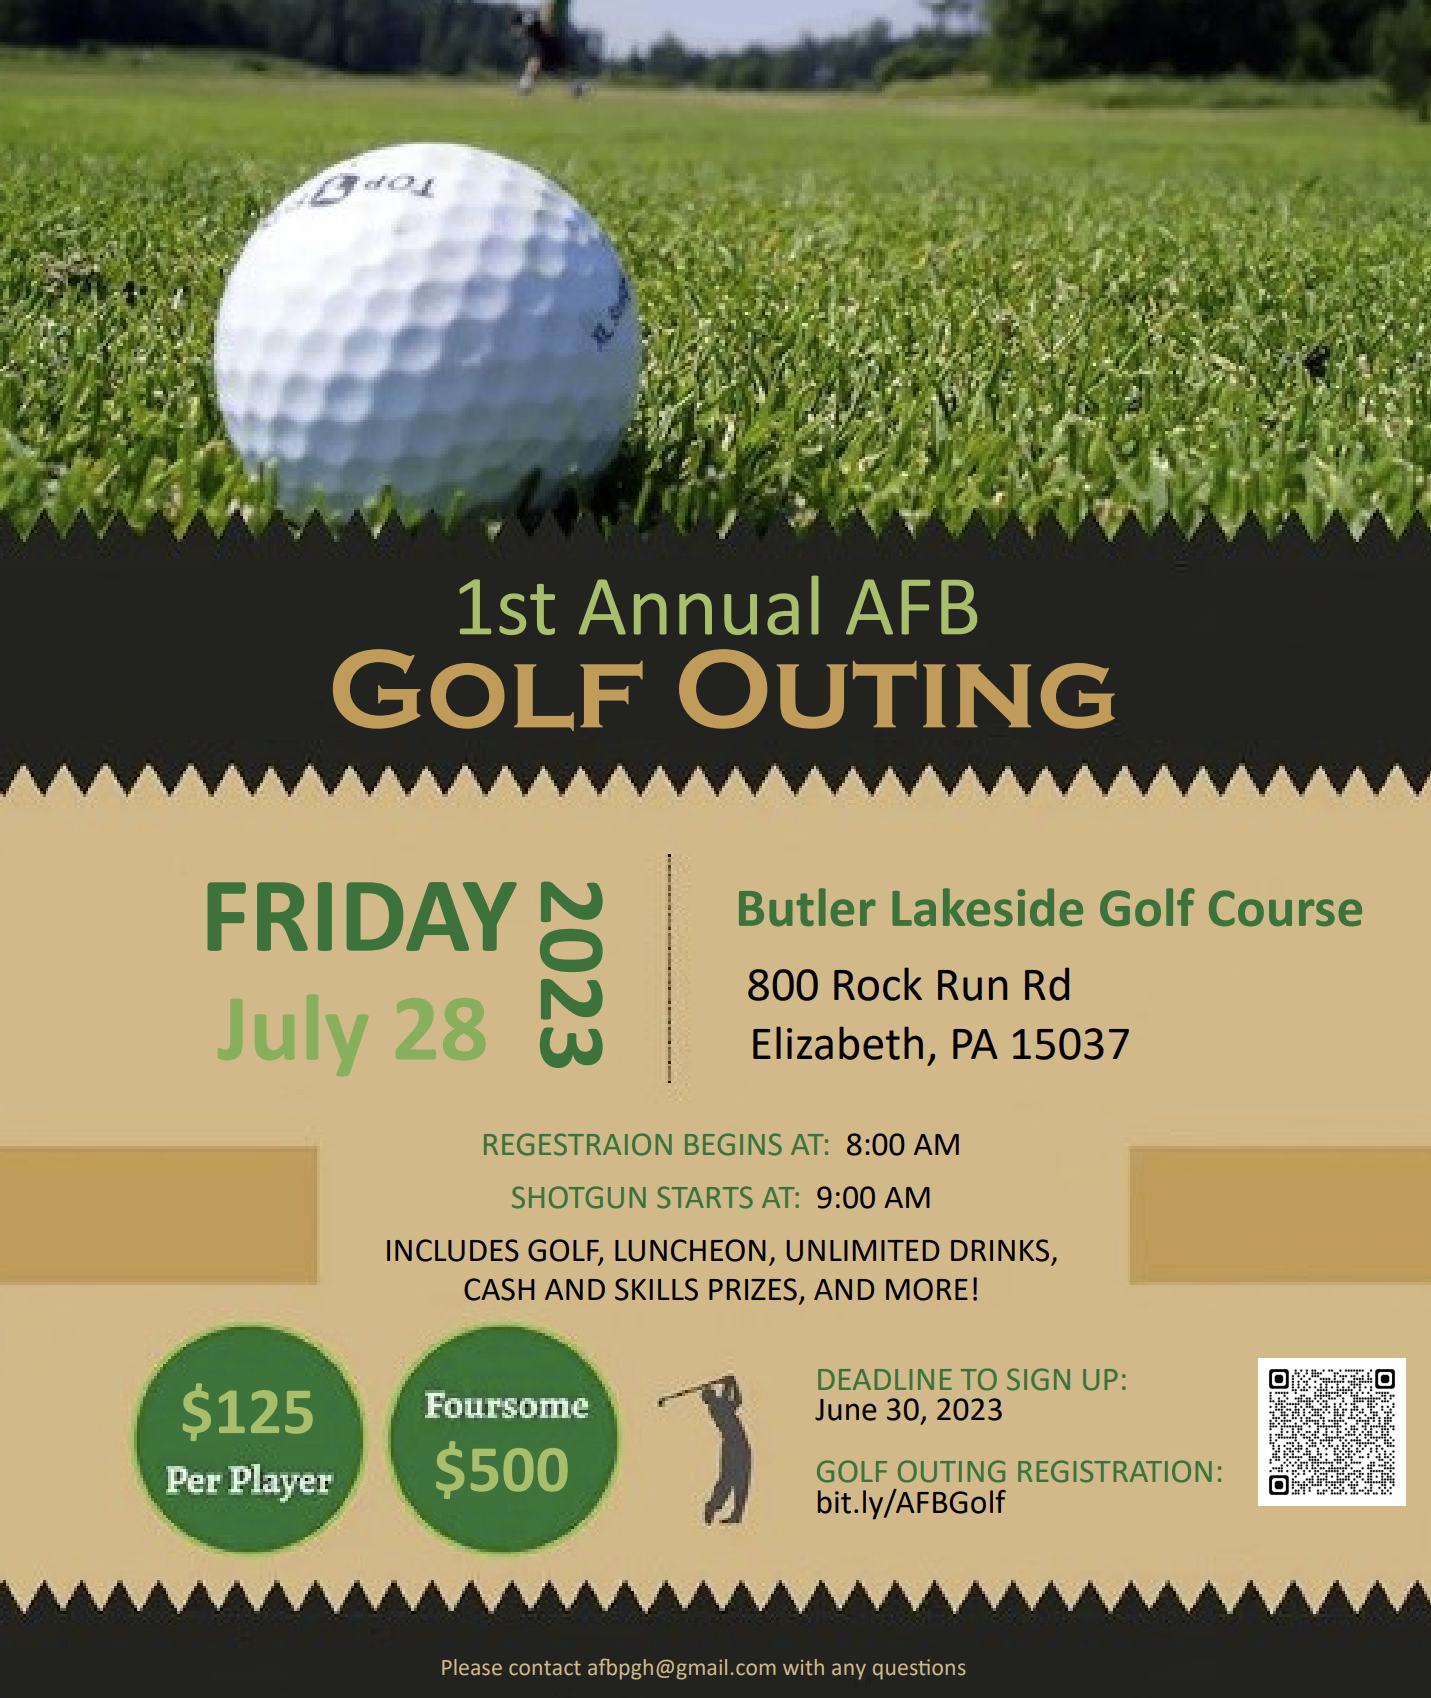 1st ANNUAL AFB GOLF OUTING